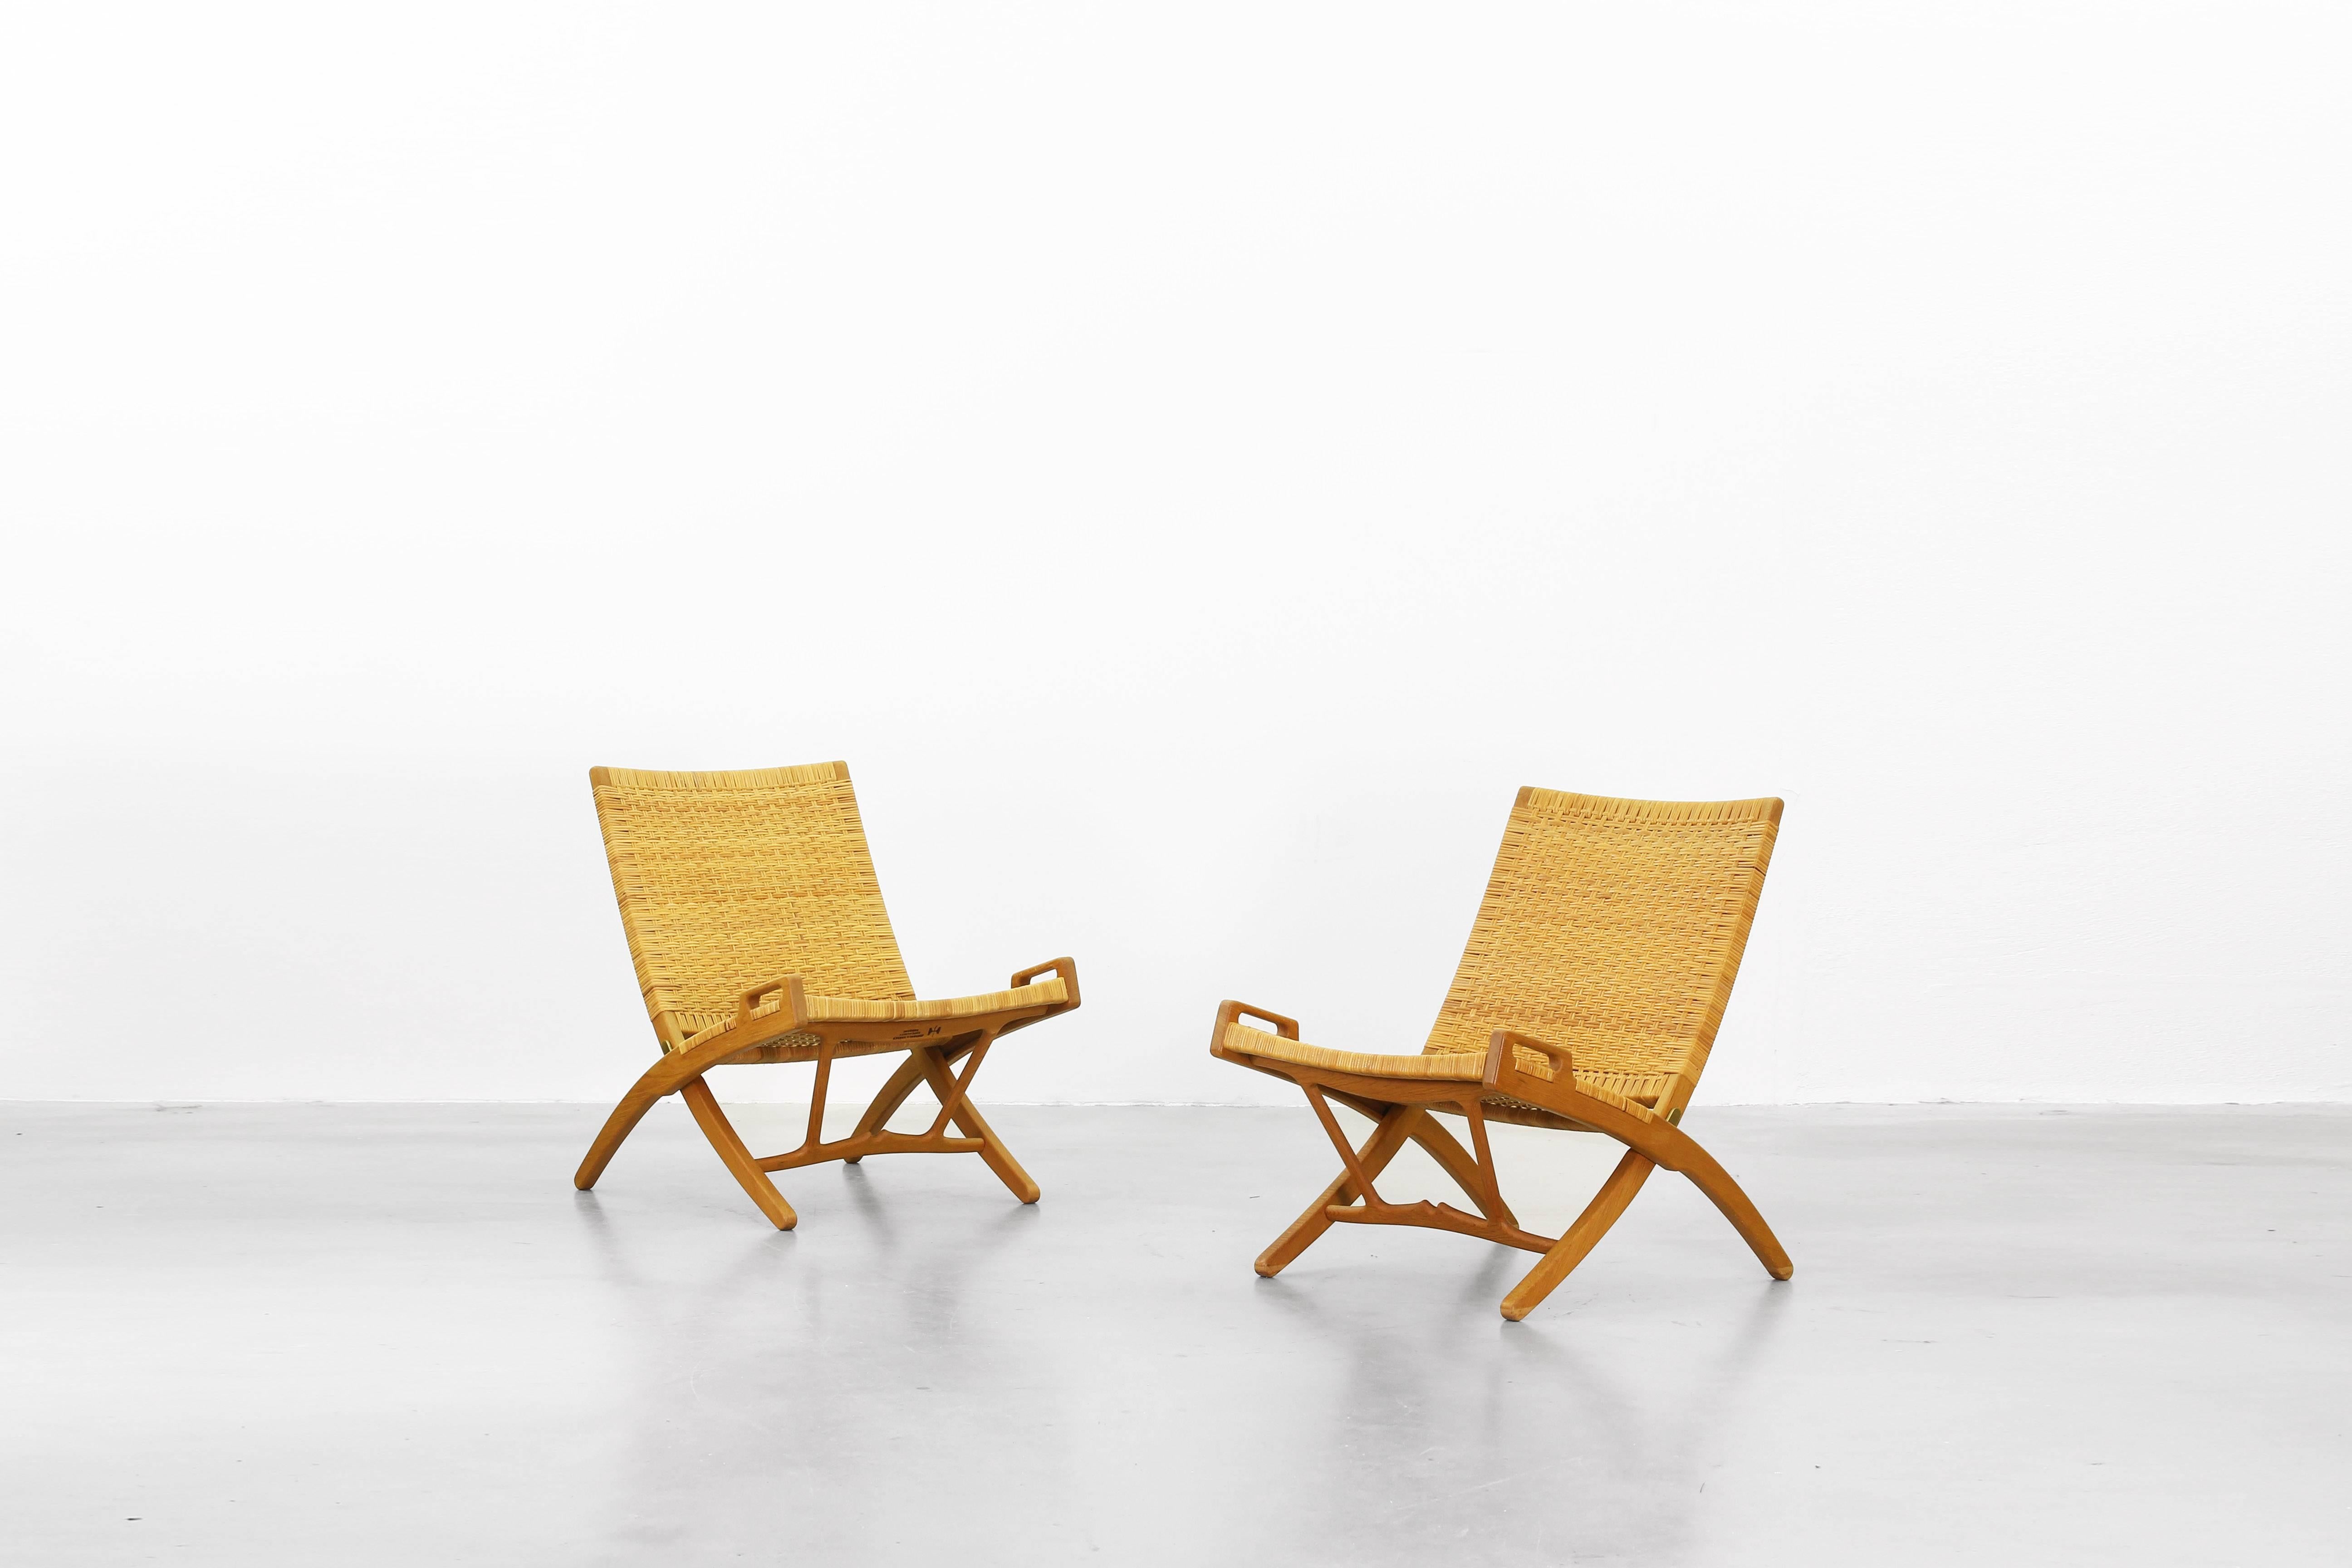 A beautiful pair of folding lounge chairs designed by Hans J. Wegner for Johannes Hansen in 1949. These beautiful pieces are made of oak and cane and both lounge chairs are in an excellent original condition without any marks or cracks.